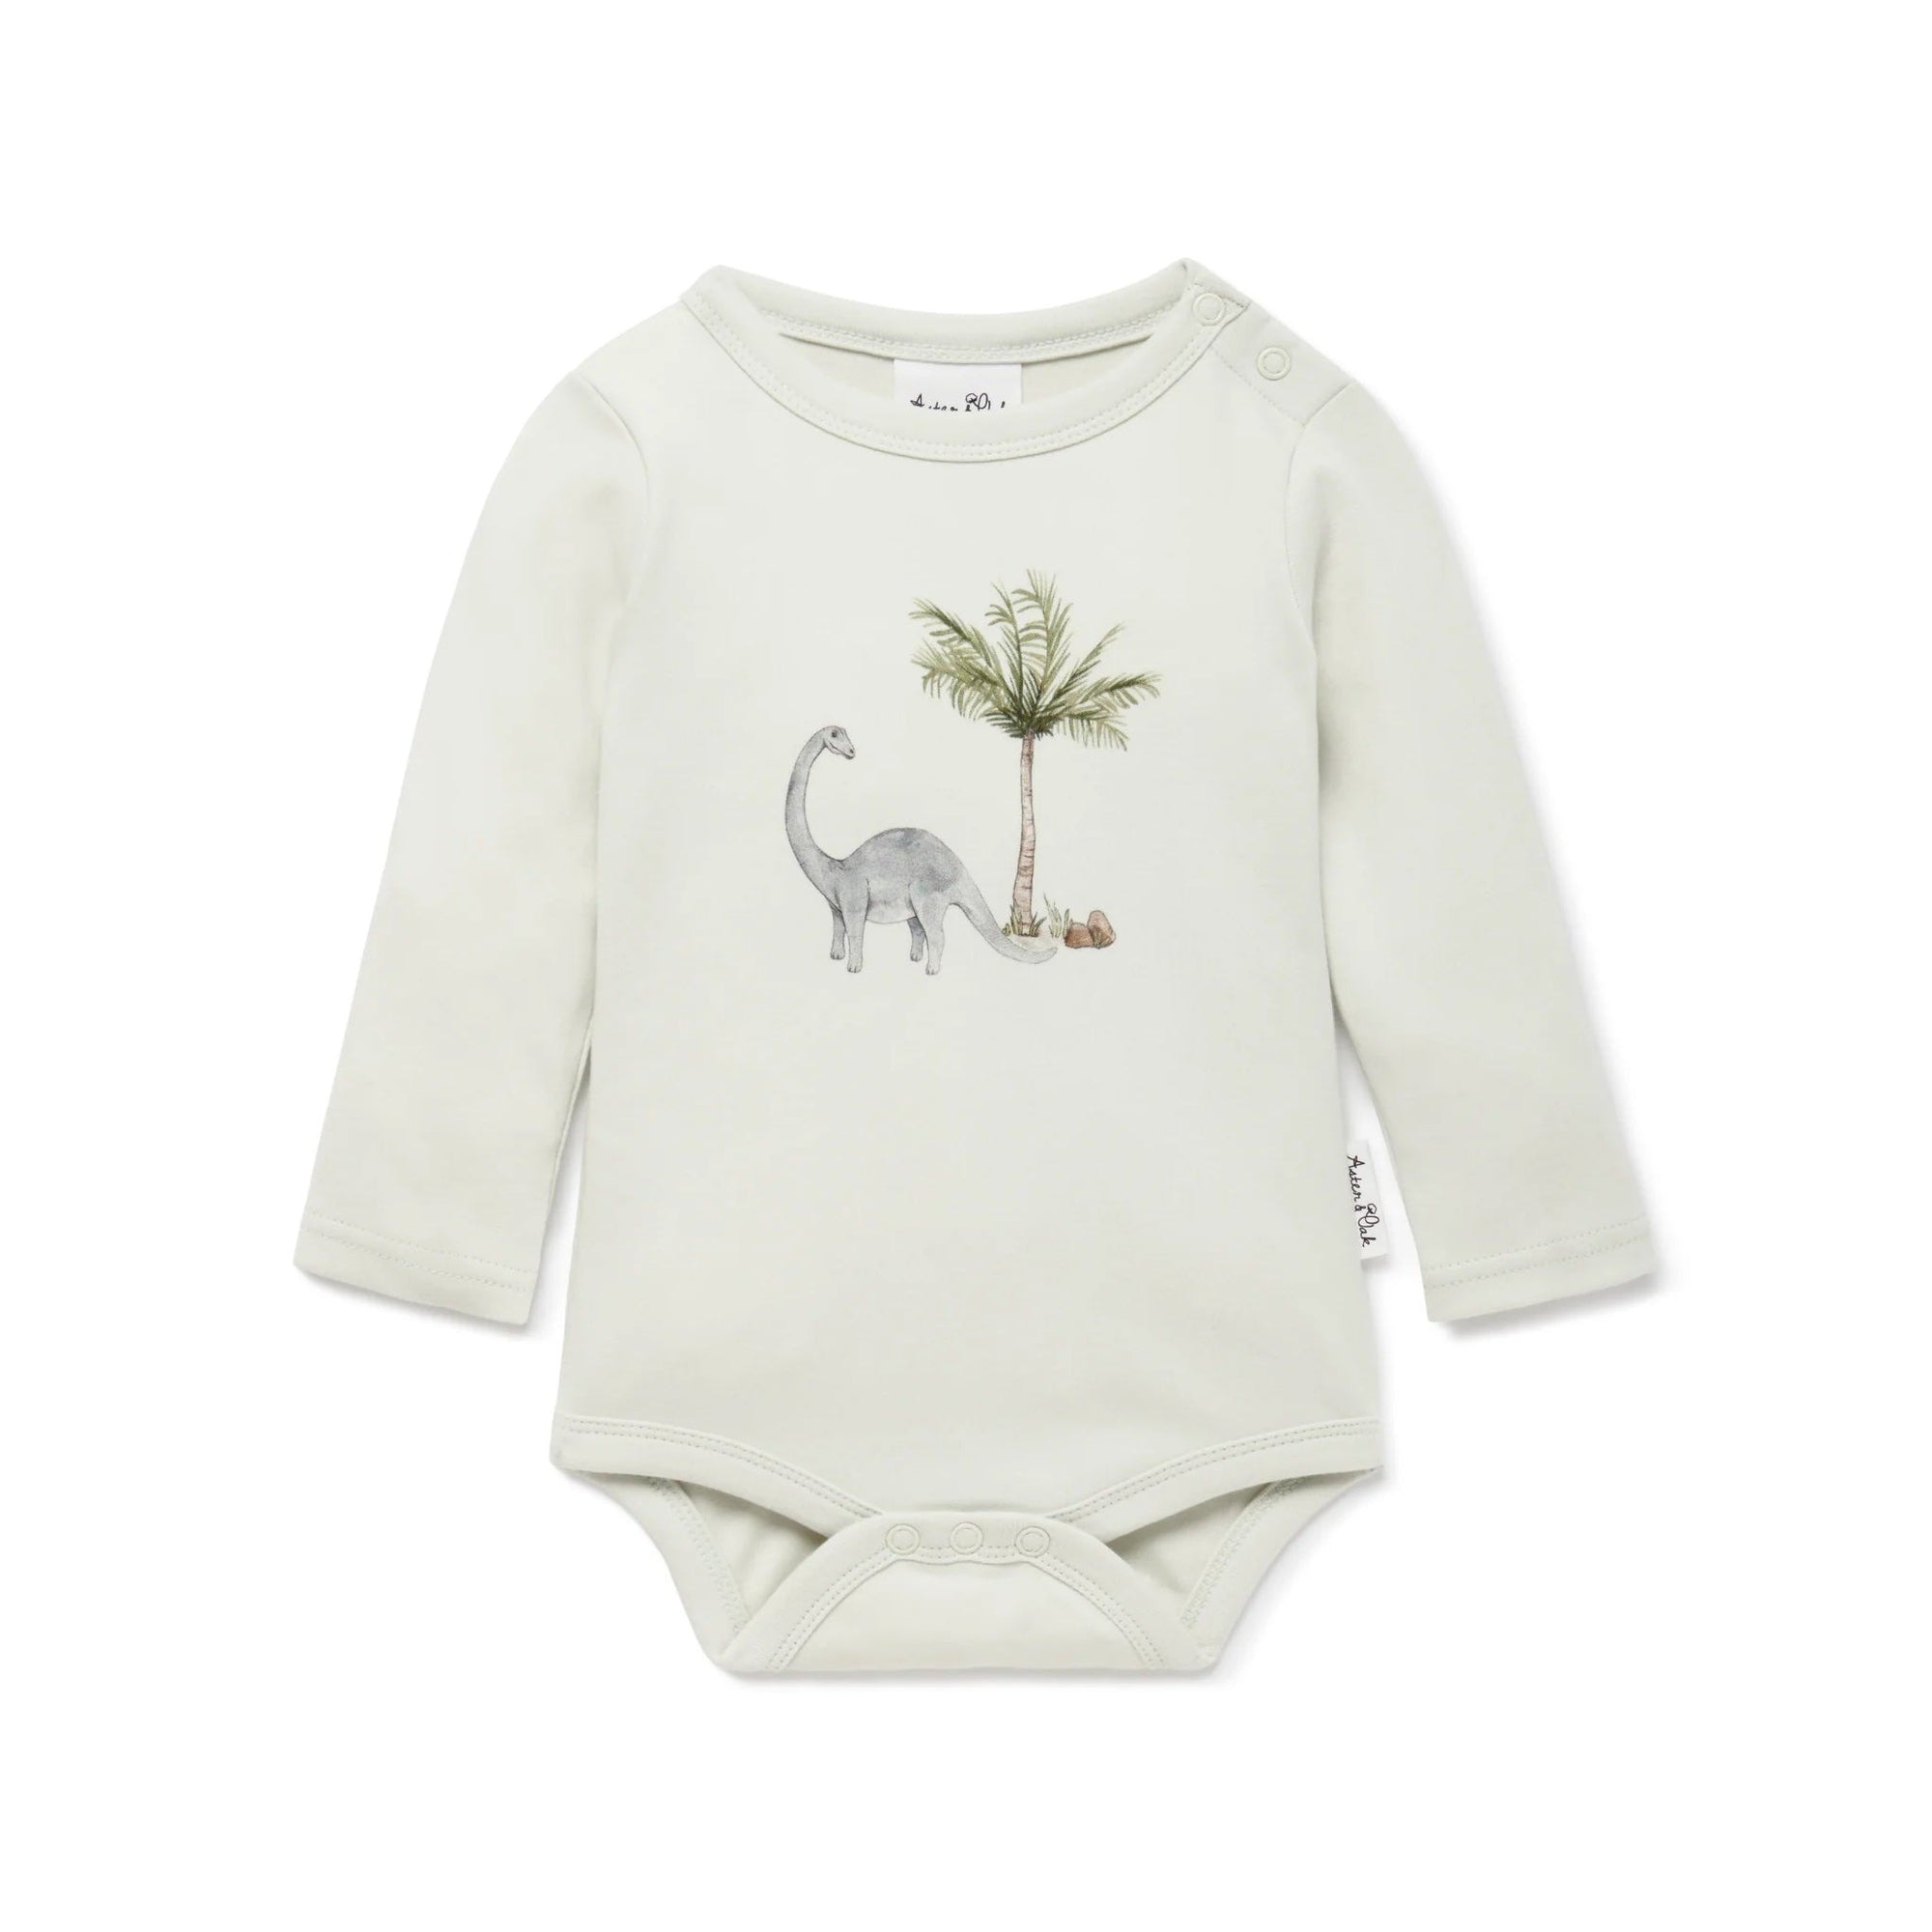 baby boy bodysuit - angus and dudley